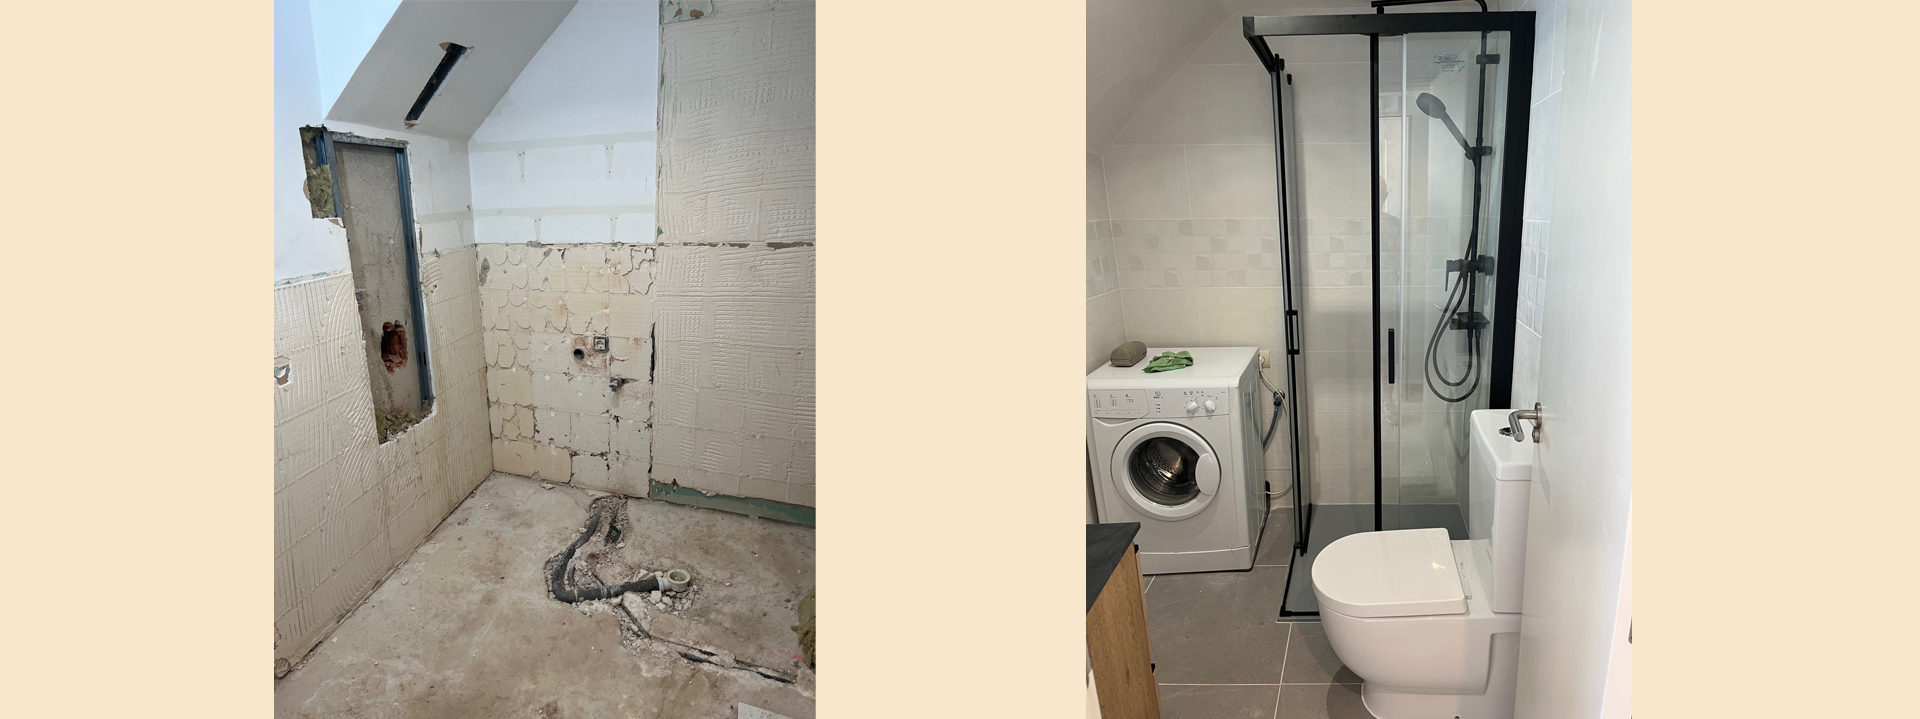 Bathroom-renovation-before-and-after-1